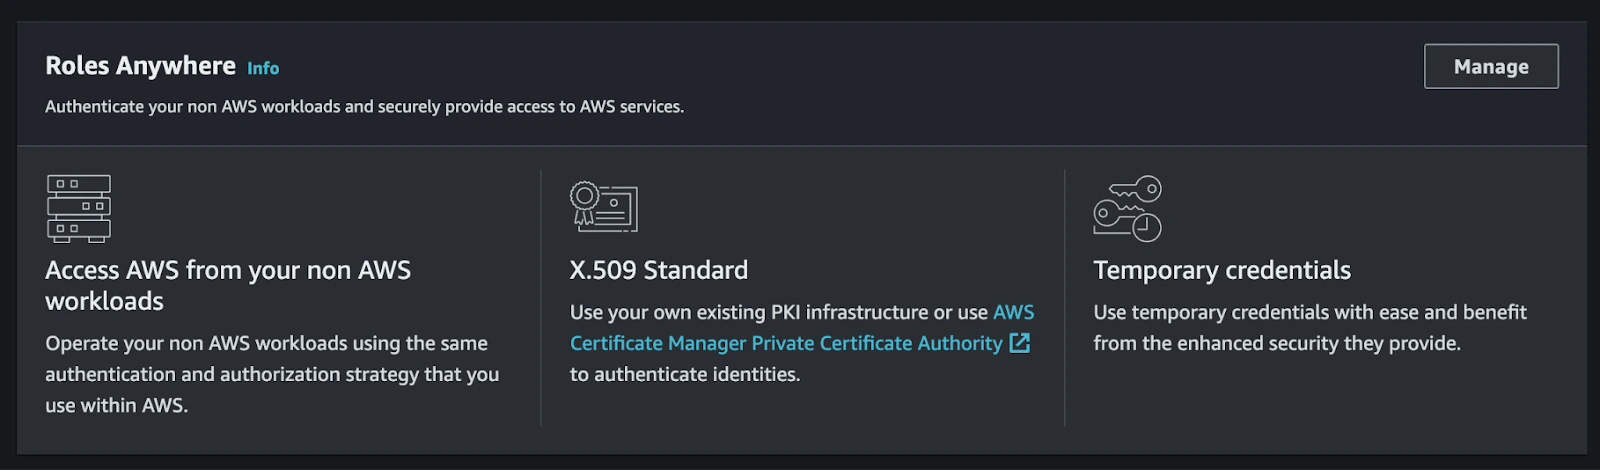 How to Securely Access AWS APIs with IAM Roles Anywhere